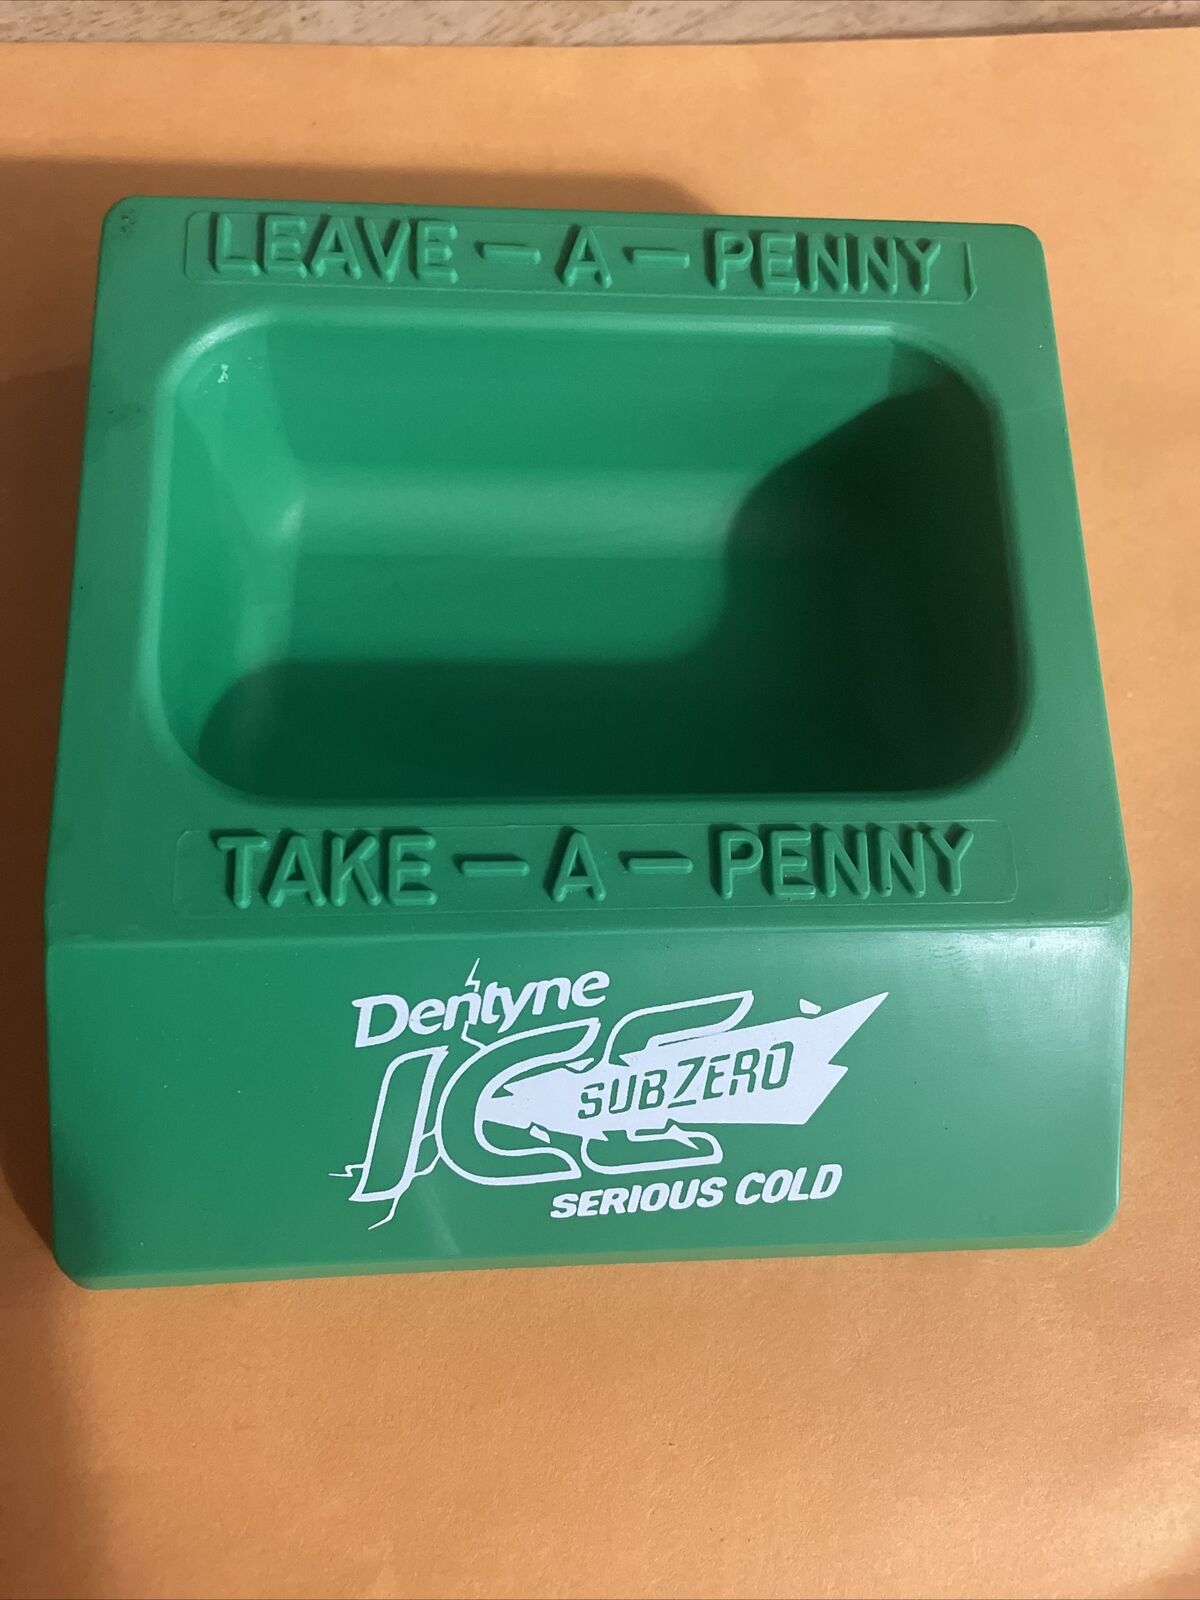 DENTYNE ICE SUB ZERO - Leave-A-Penny Take-A-Penny Counter Display Tray - USED